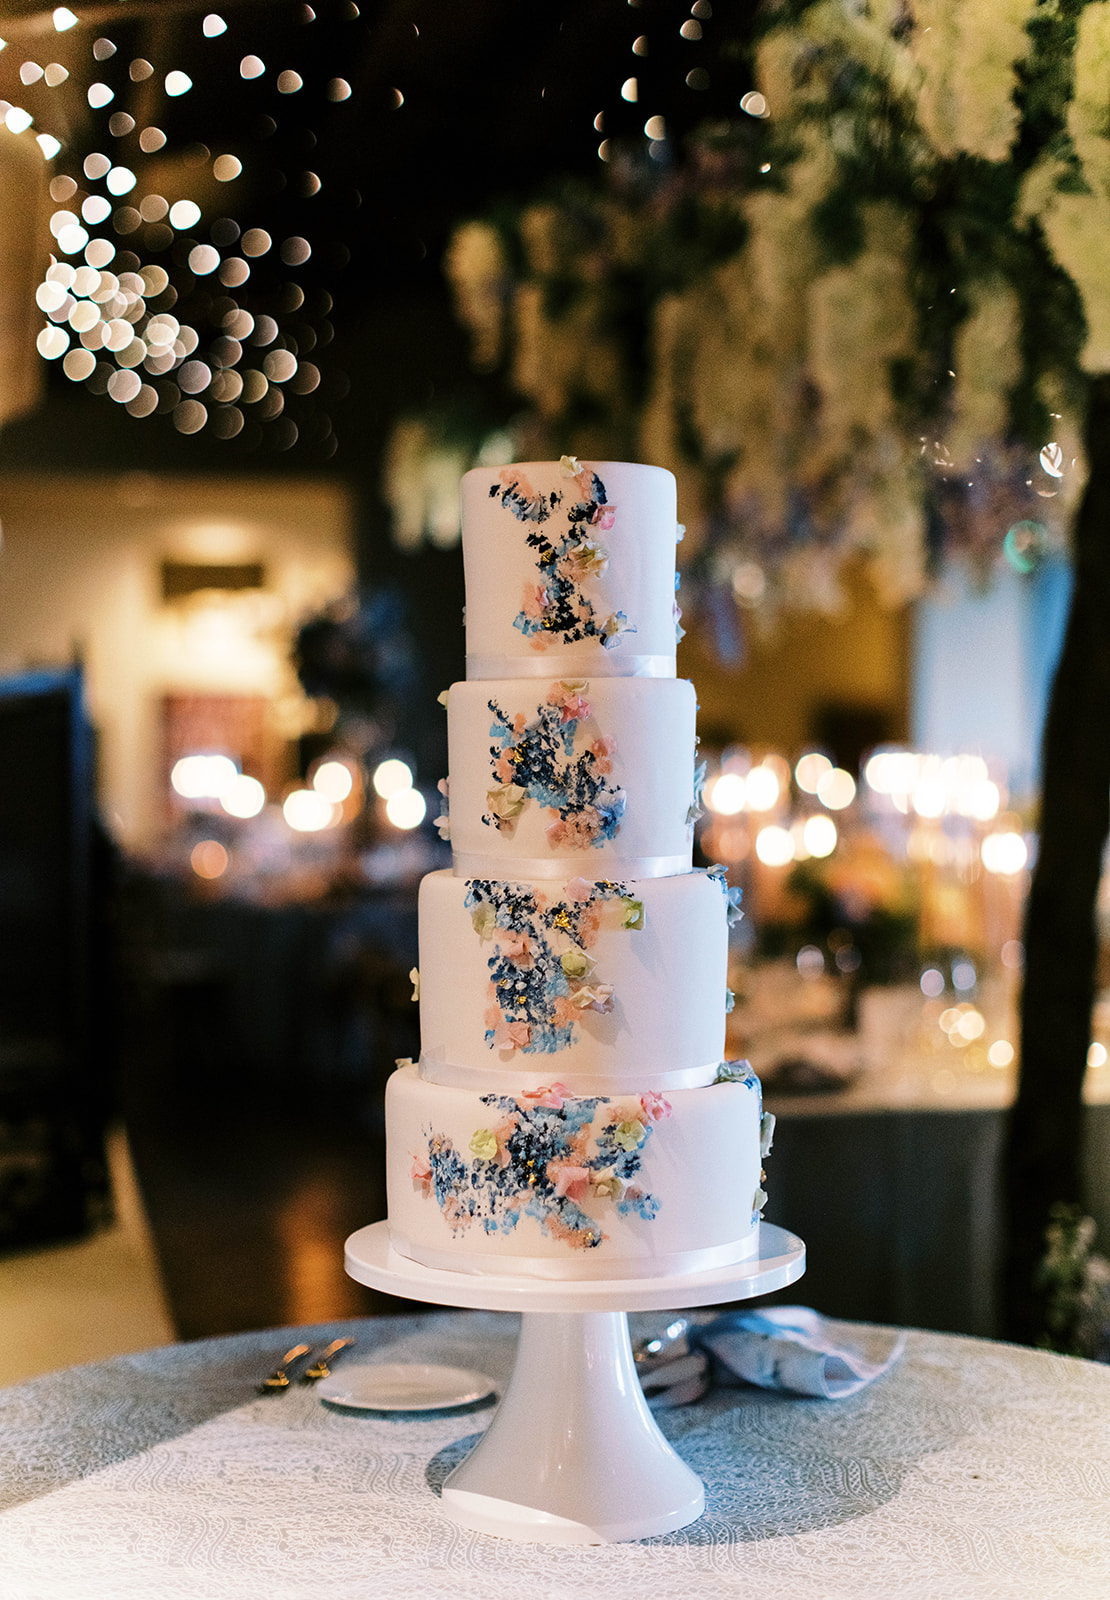 a garden party four tier white wedding cake with painted pastel flowers. photo by megan robinson photography